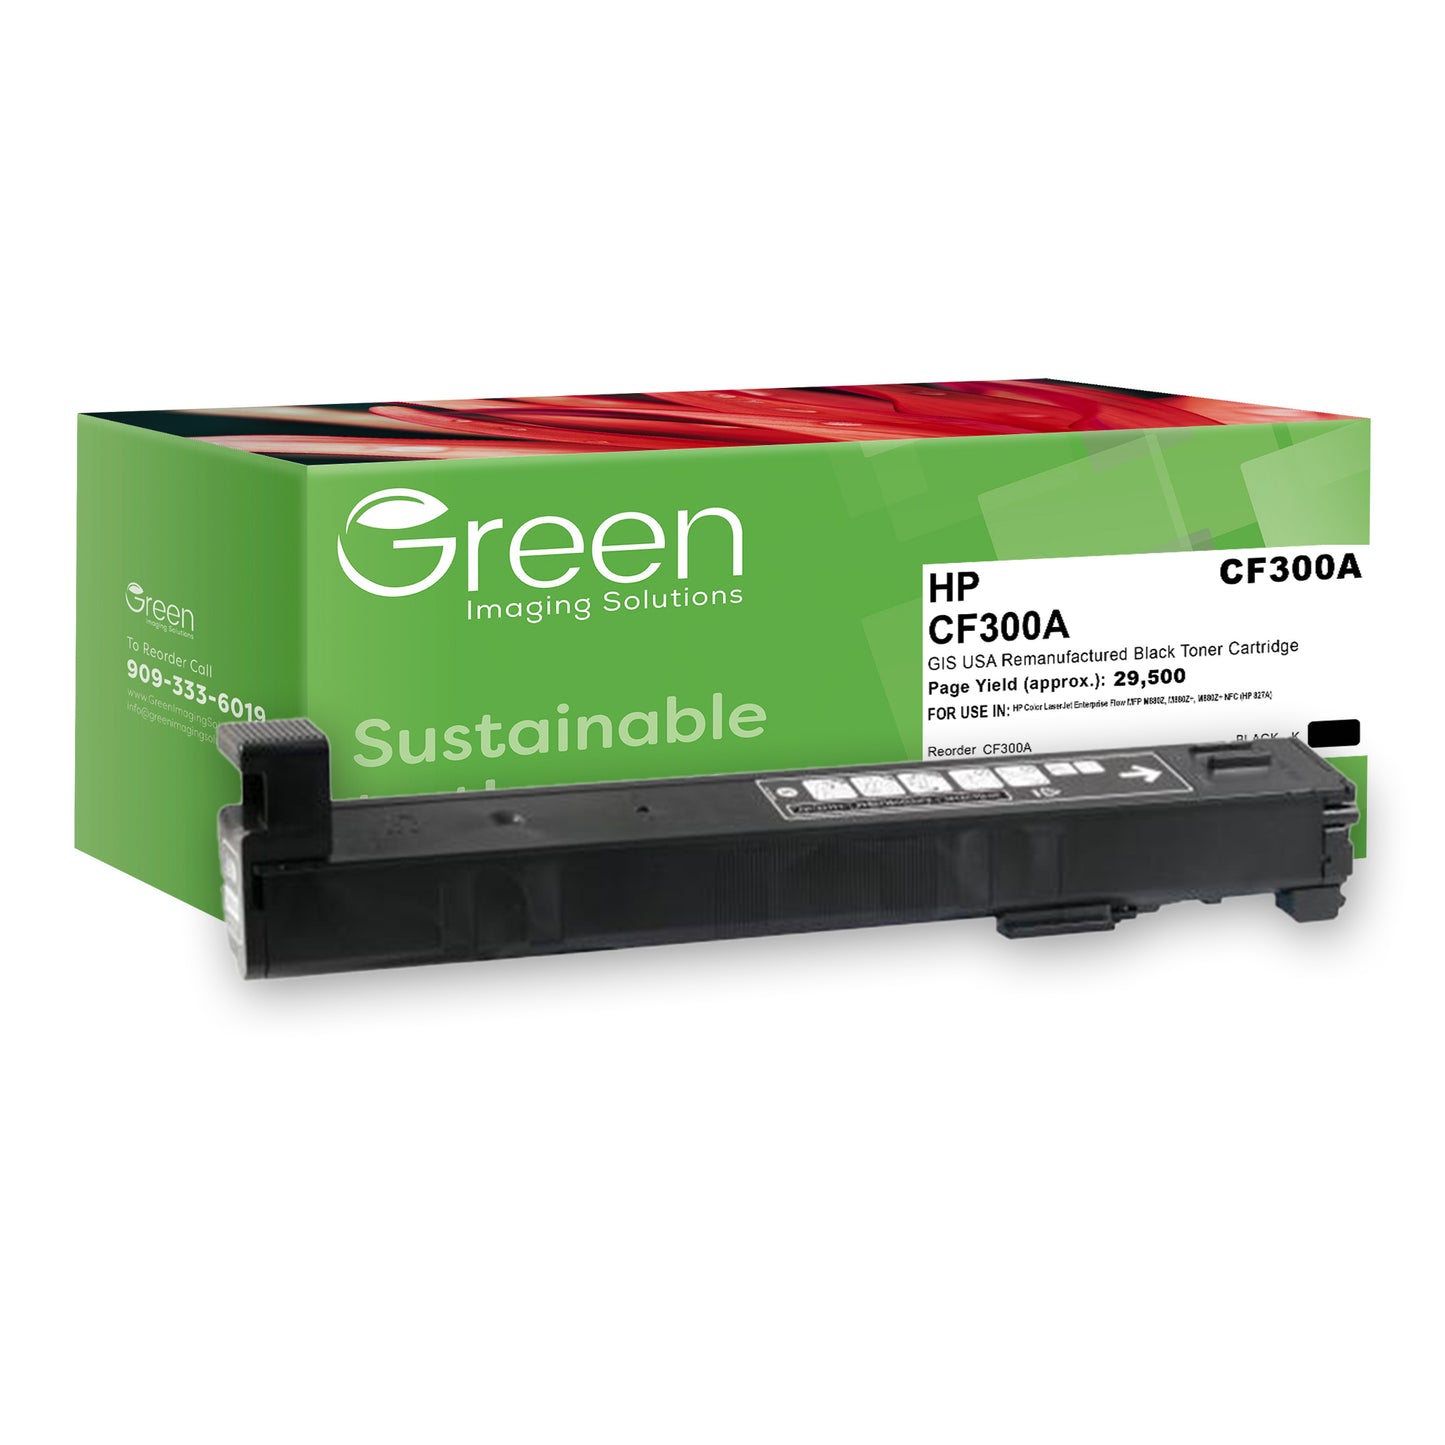 Green Imaging Solutions USA Remanufactured Black Toner Cartridge for HP 827A (CF300A)